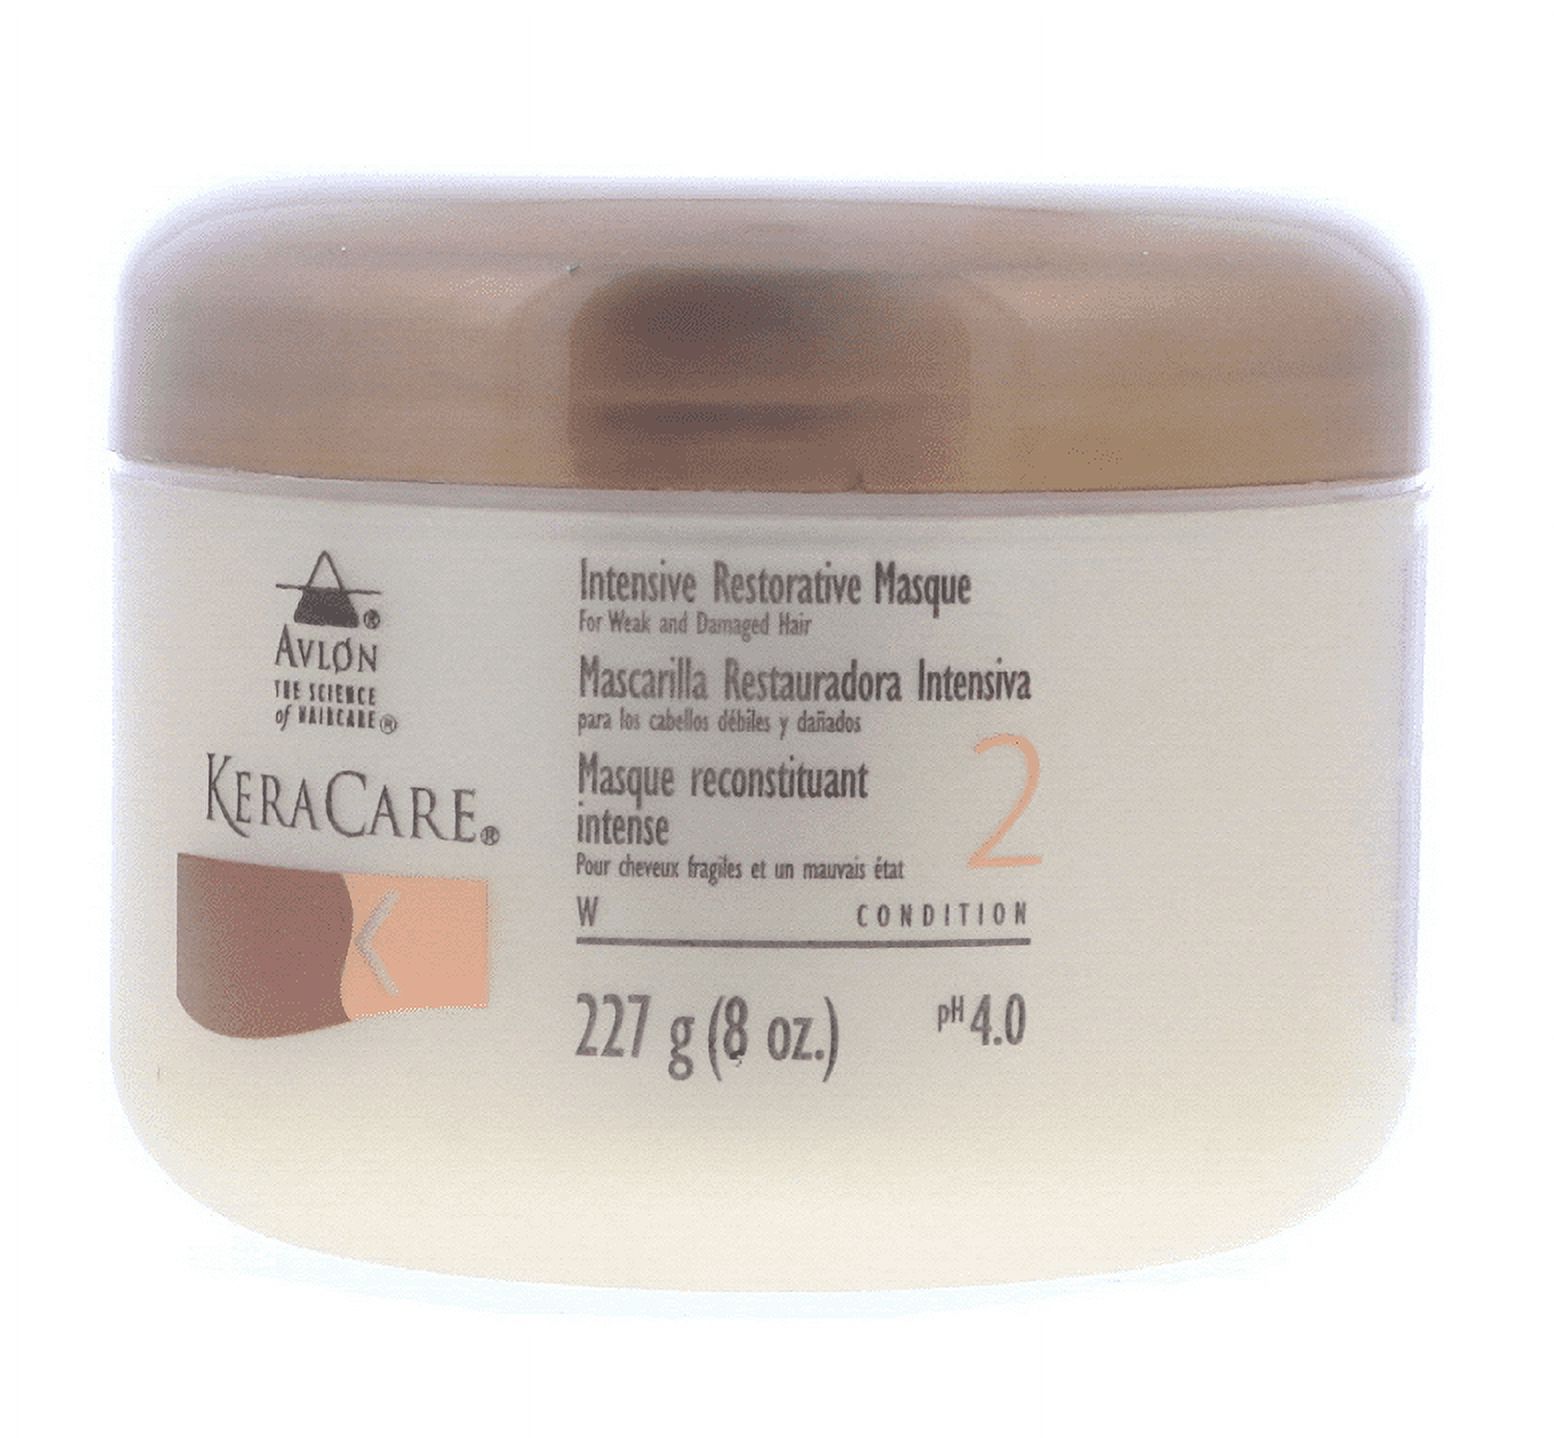 Keracare Intensive Masque For Weak And Damaged Hair 8 Oz. - image 1 of 1